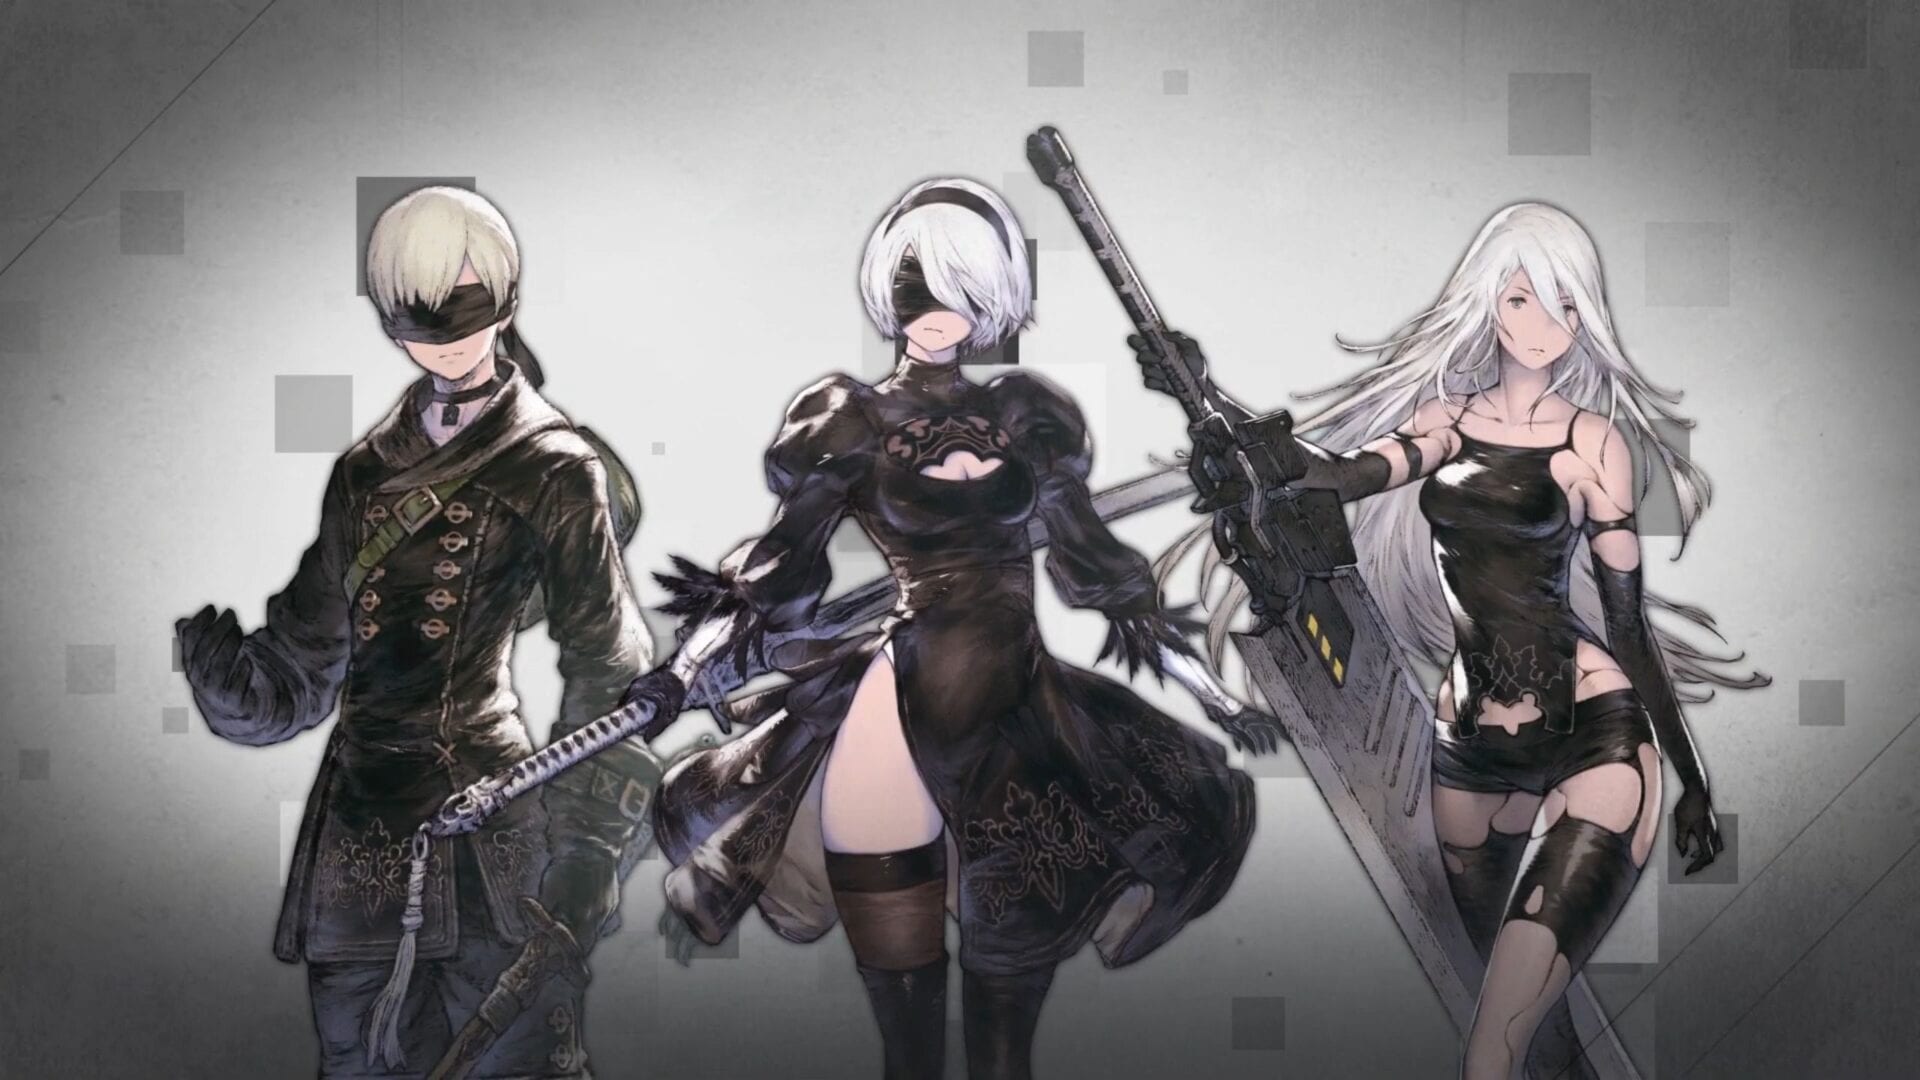 Nier Re In Carnation Gets Japanese Release Date And New Trailer Revealing Nier Automata Crossover